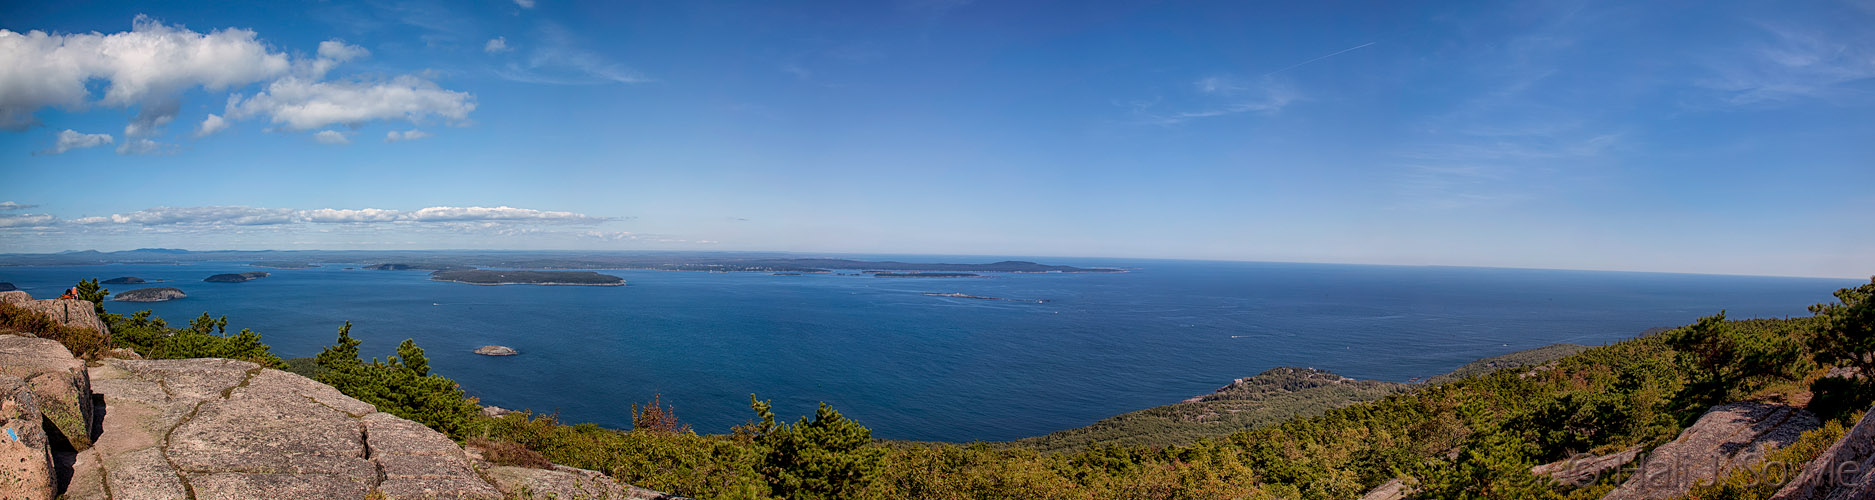 2011_09_21_AcadiaNP-10175-9Pano750.jpg - Panoramic of Frenchman's Bay from the top of Champlain Mountain.